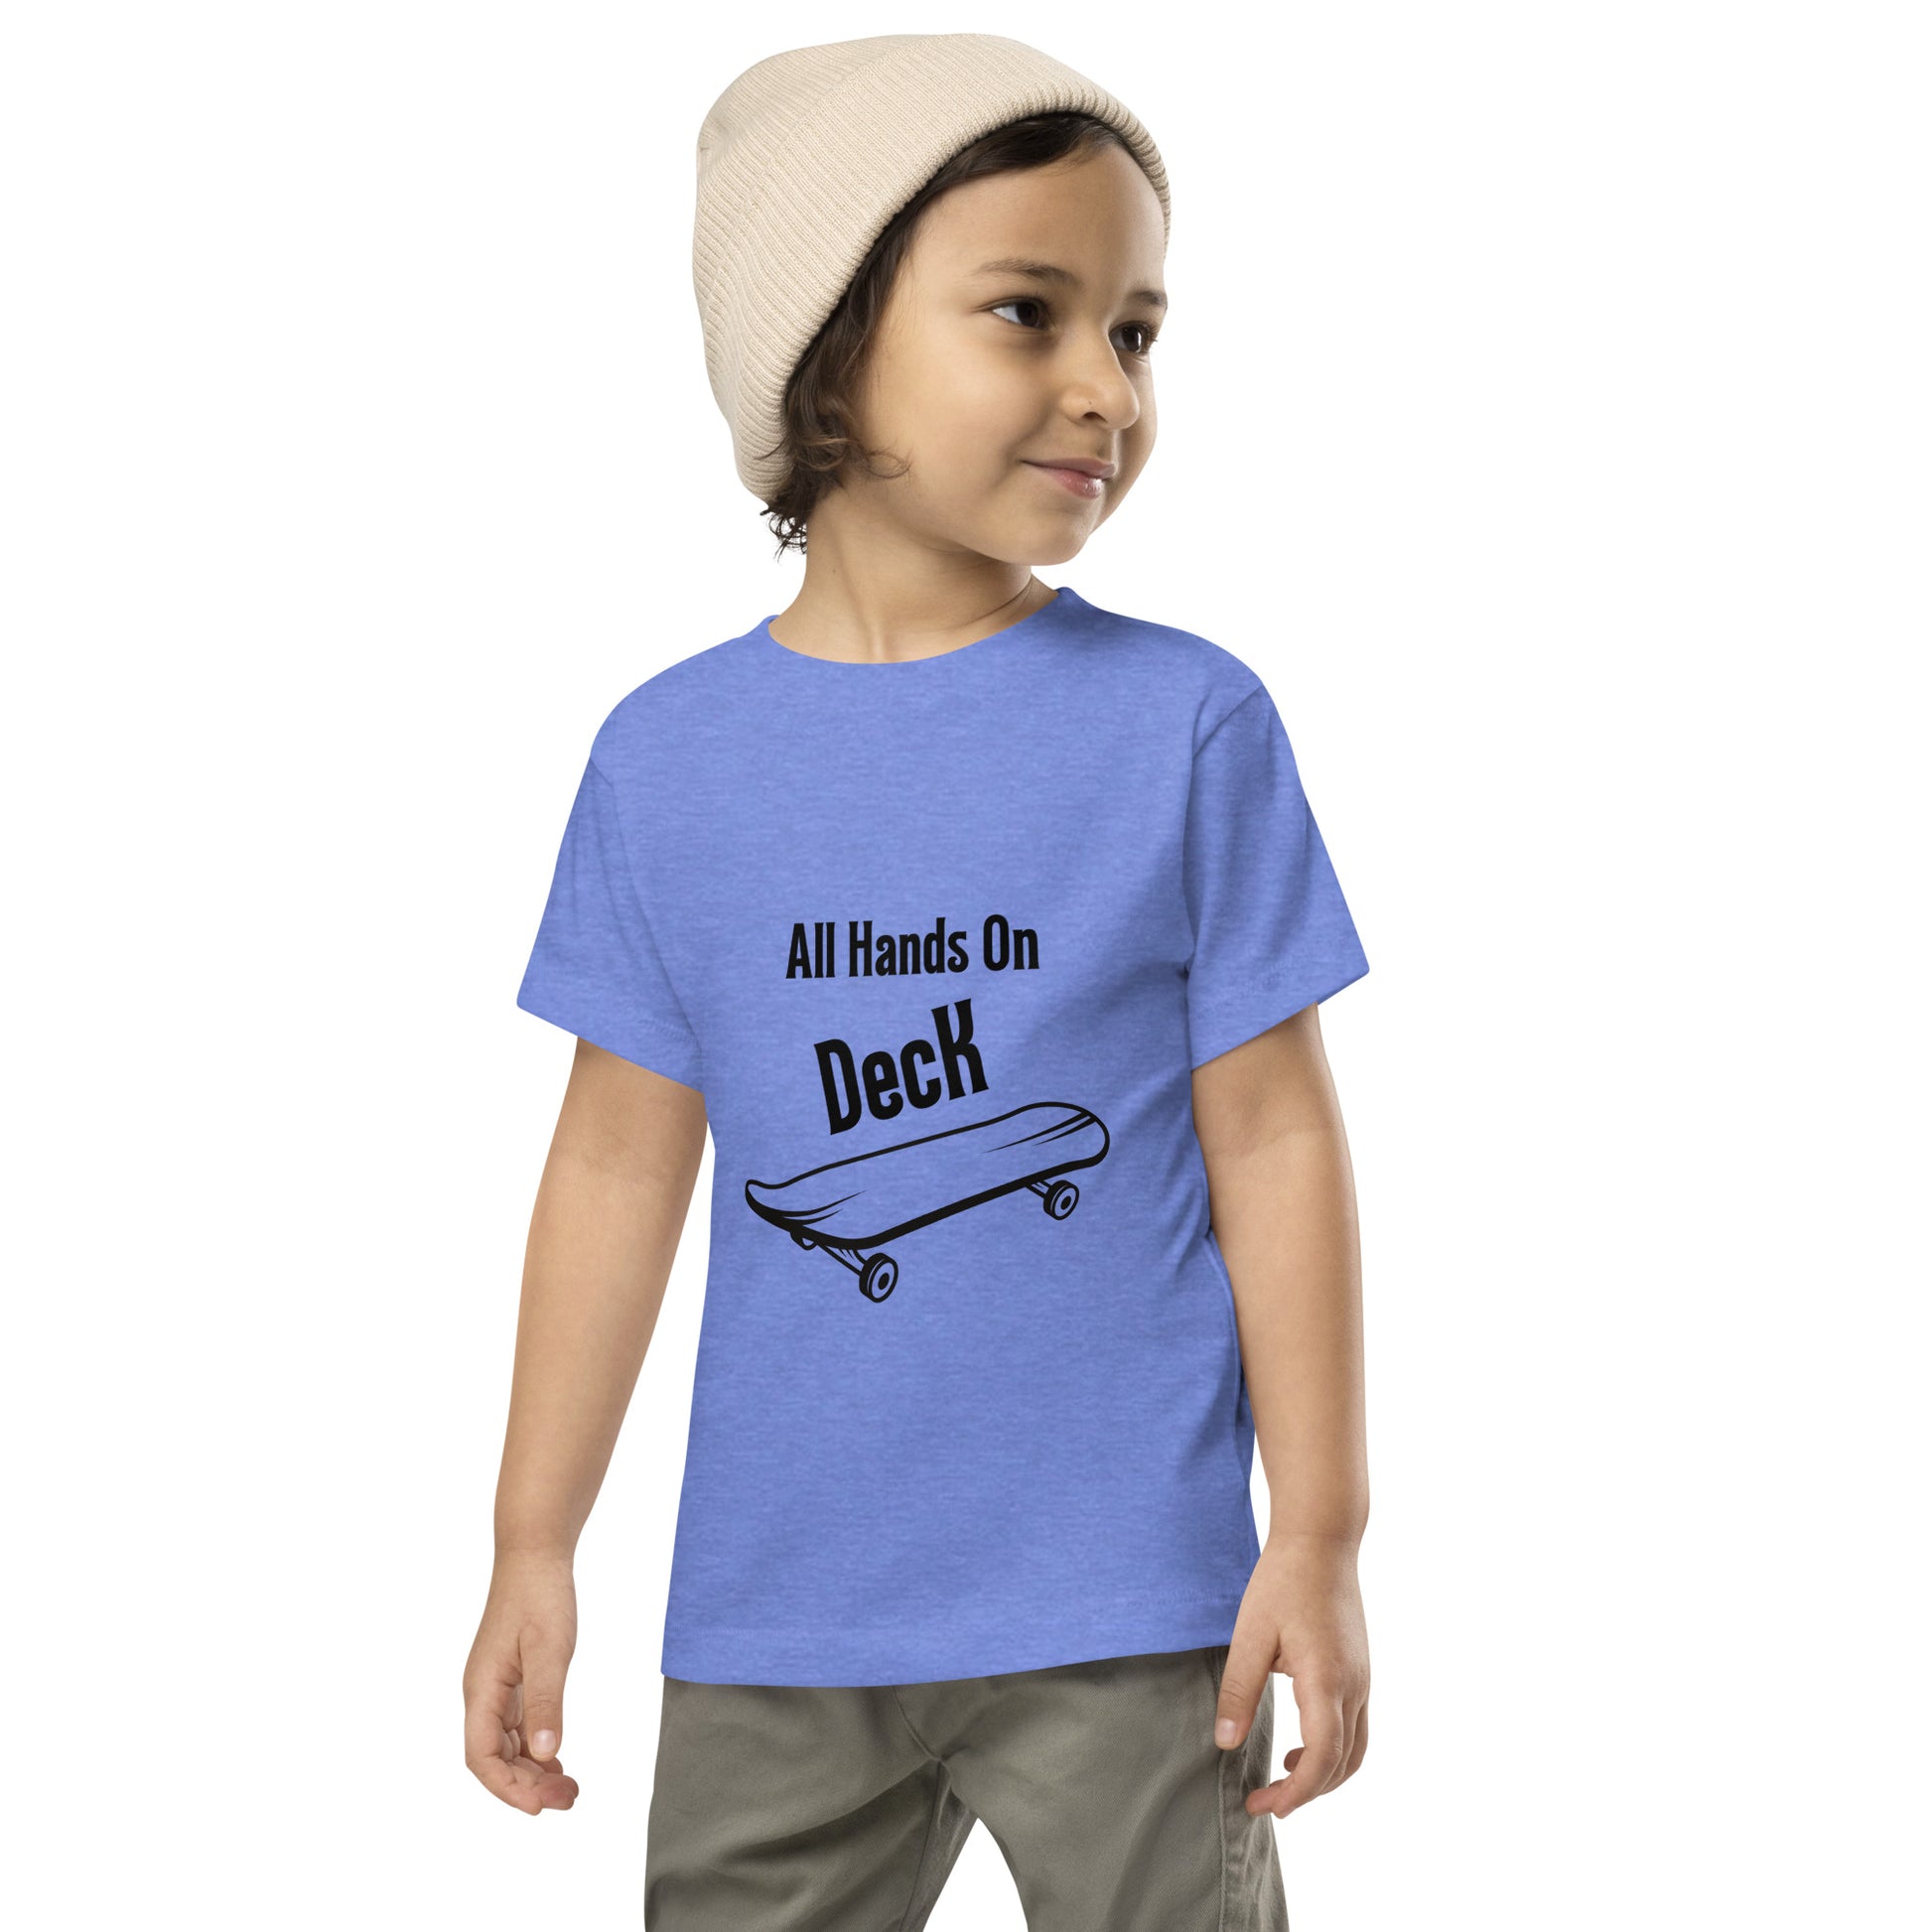 "All Hands On Deck" Kids Skater T-Shirt - Weave Got Gifts - Unique Gifts You Won’t Find Anywhere Else!